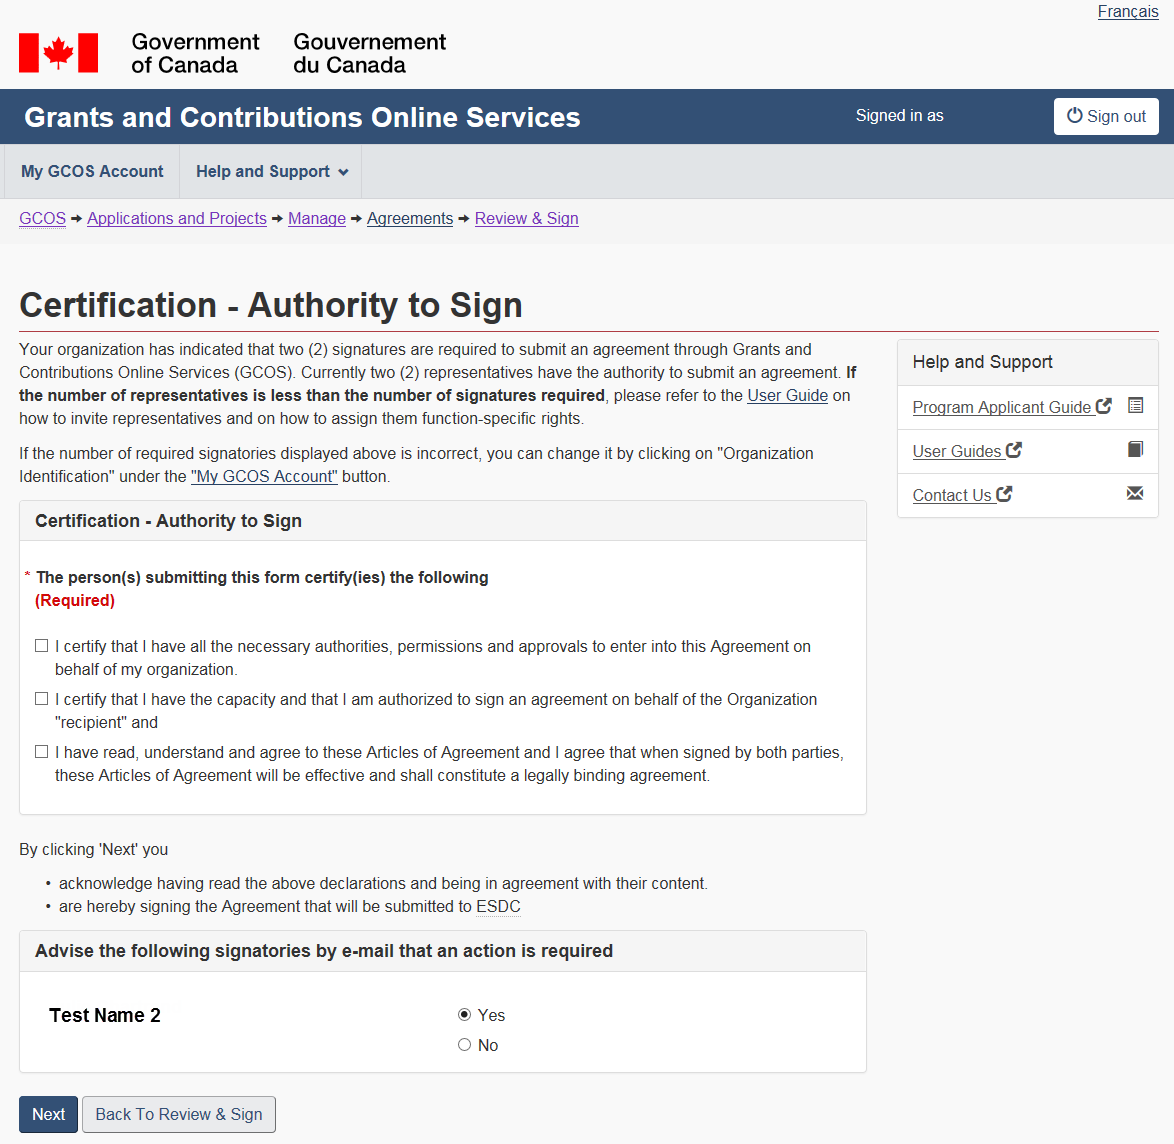 Figure 57 – Certification – Authority to sign screen (Multiple signatories required): description follows